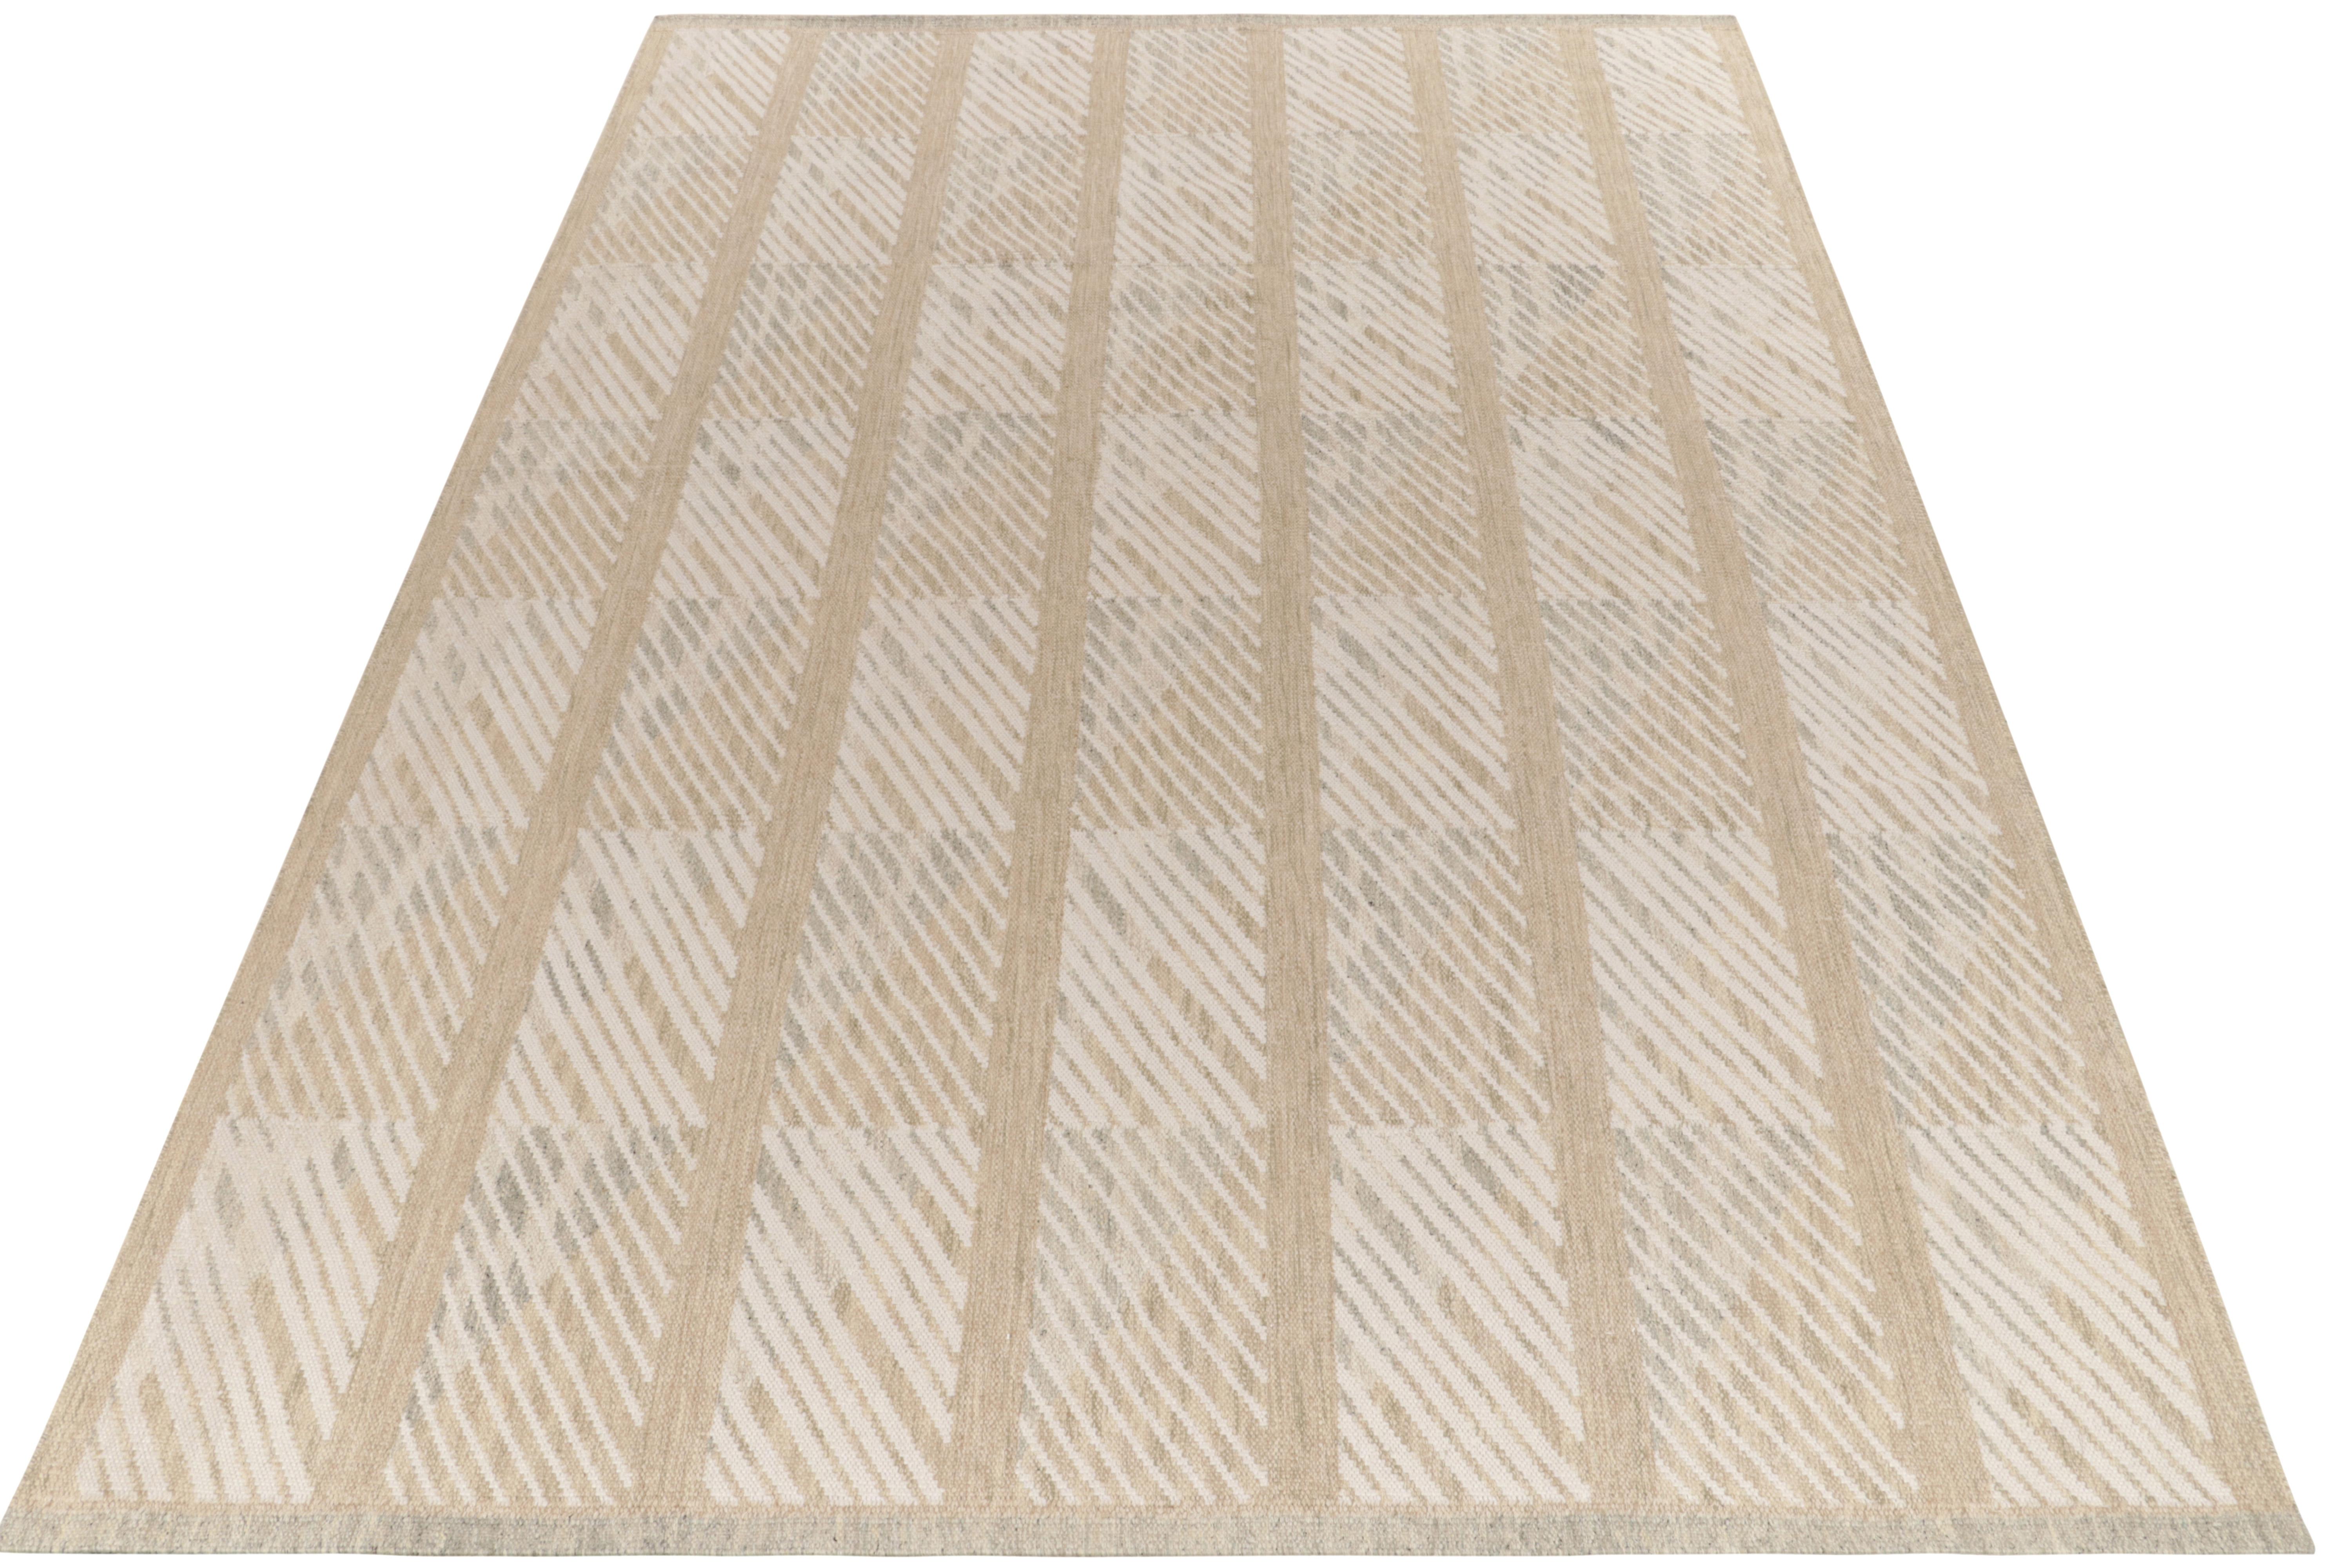 Handwoven in fine quality wool, a 10x14 kilim joining our collection of award-winning Scandinavian flatweaves. This particular rug features a sharp geometric pattern with striations in gray, white & beige-brown with an innovative reflection on fine